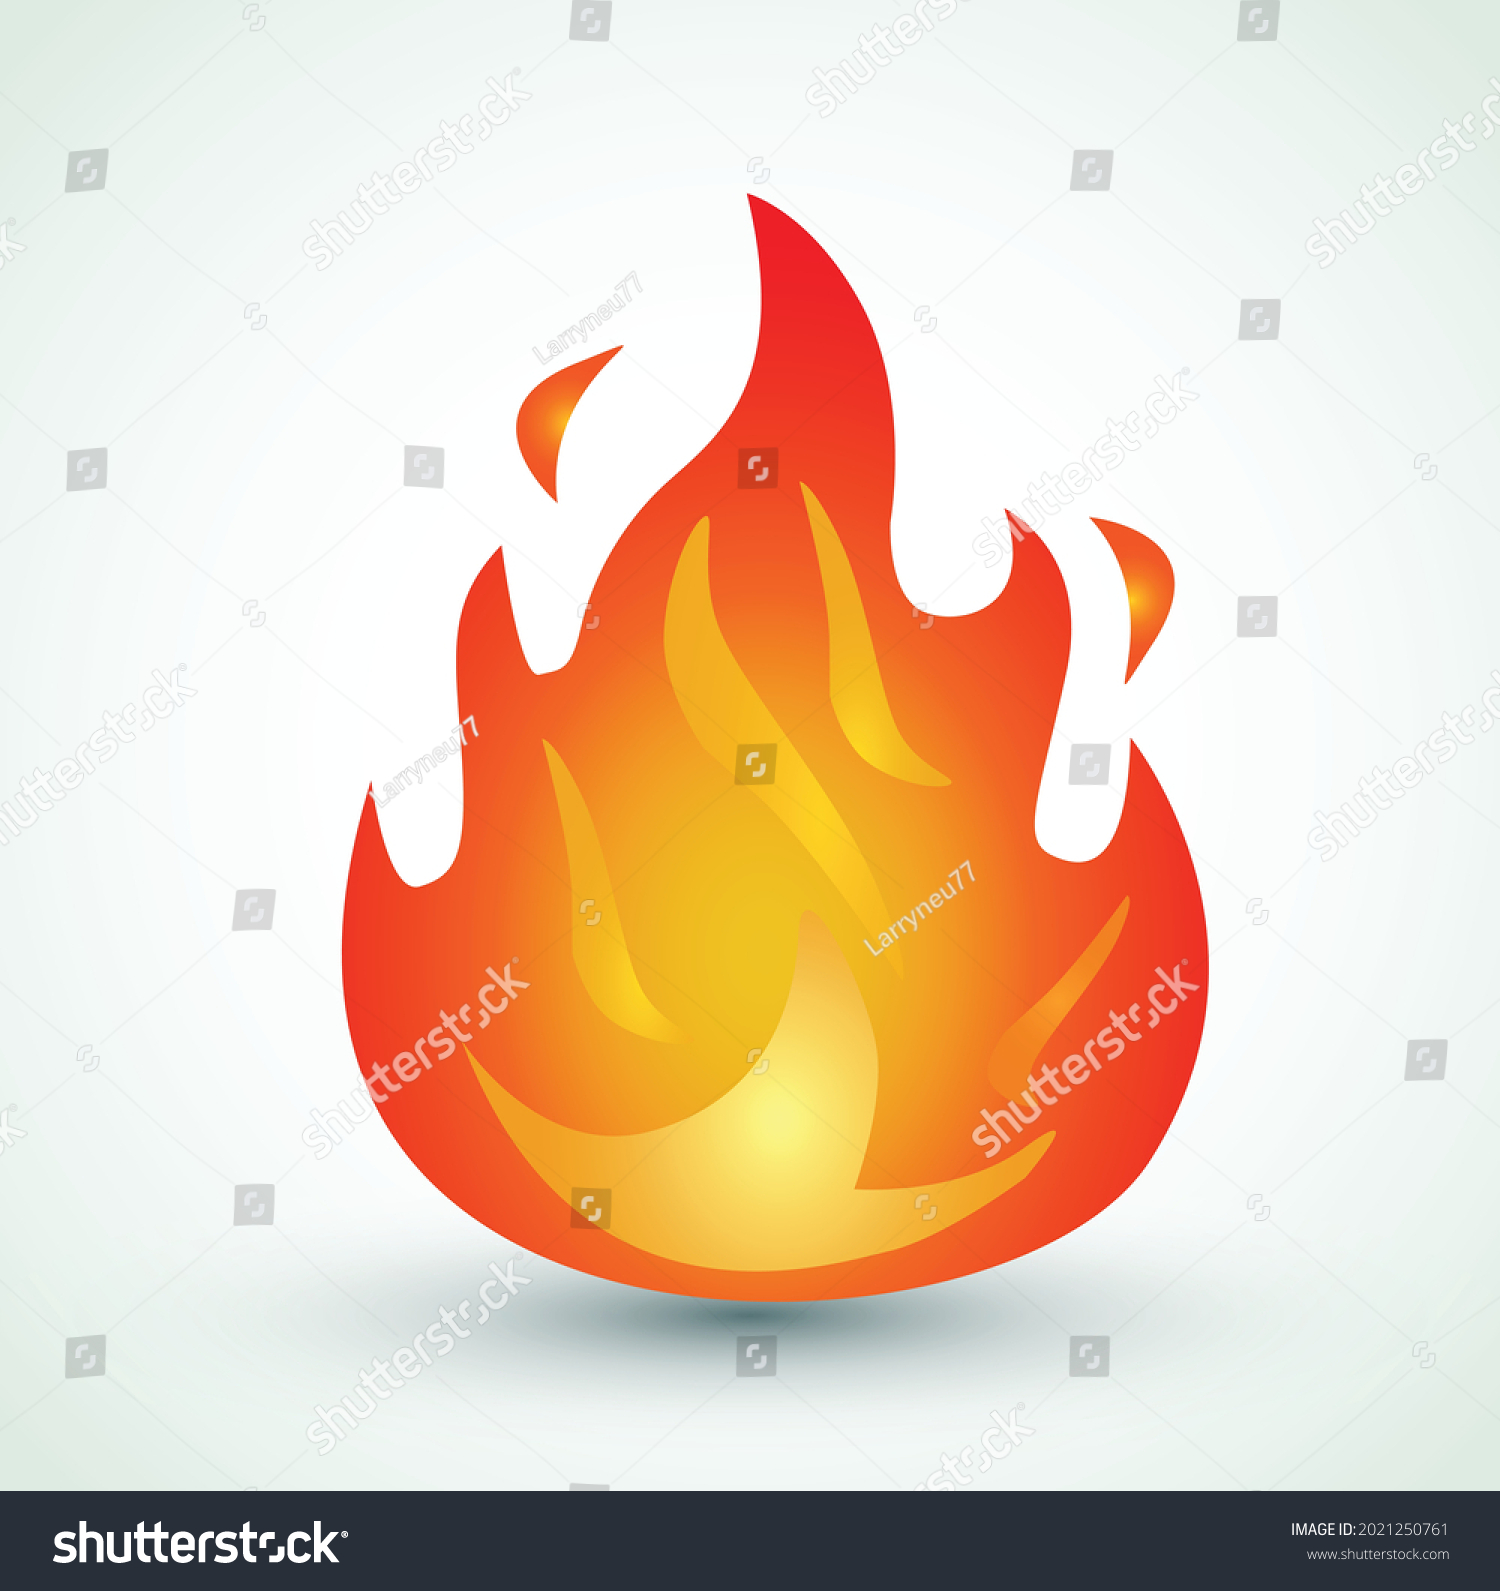 SVG of Fire burn emoji flames icon isolated on white background. Vector illustration social media Facebook Whatsapp Instagram Apple Google chat comment reactions, icon template heart love burn svg